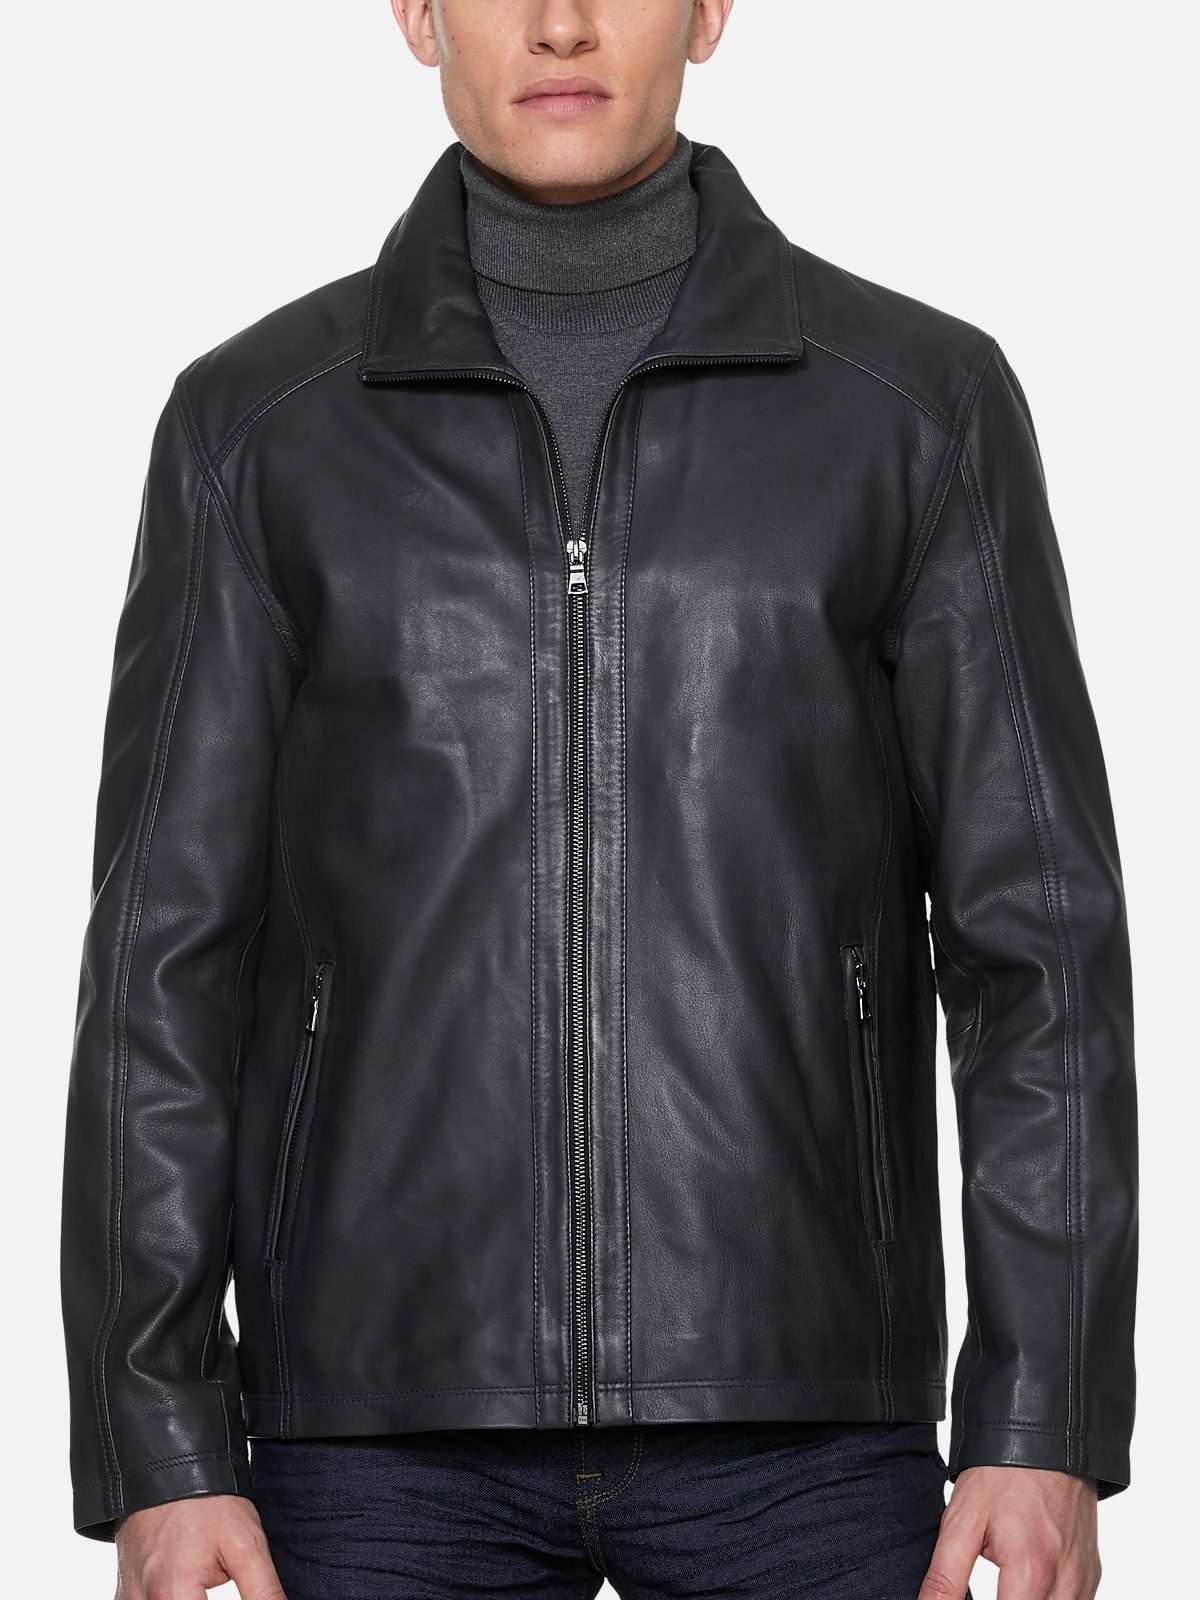 Sly & Co Leather Bomber Jacket | Outerwear| Men's Wearhouse